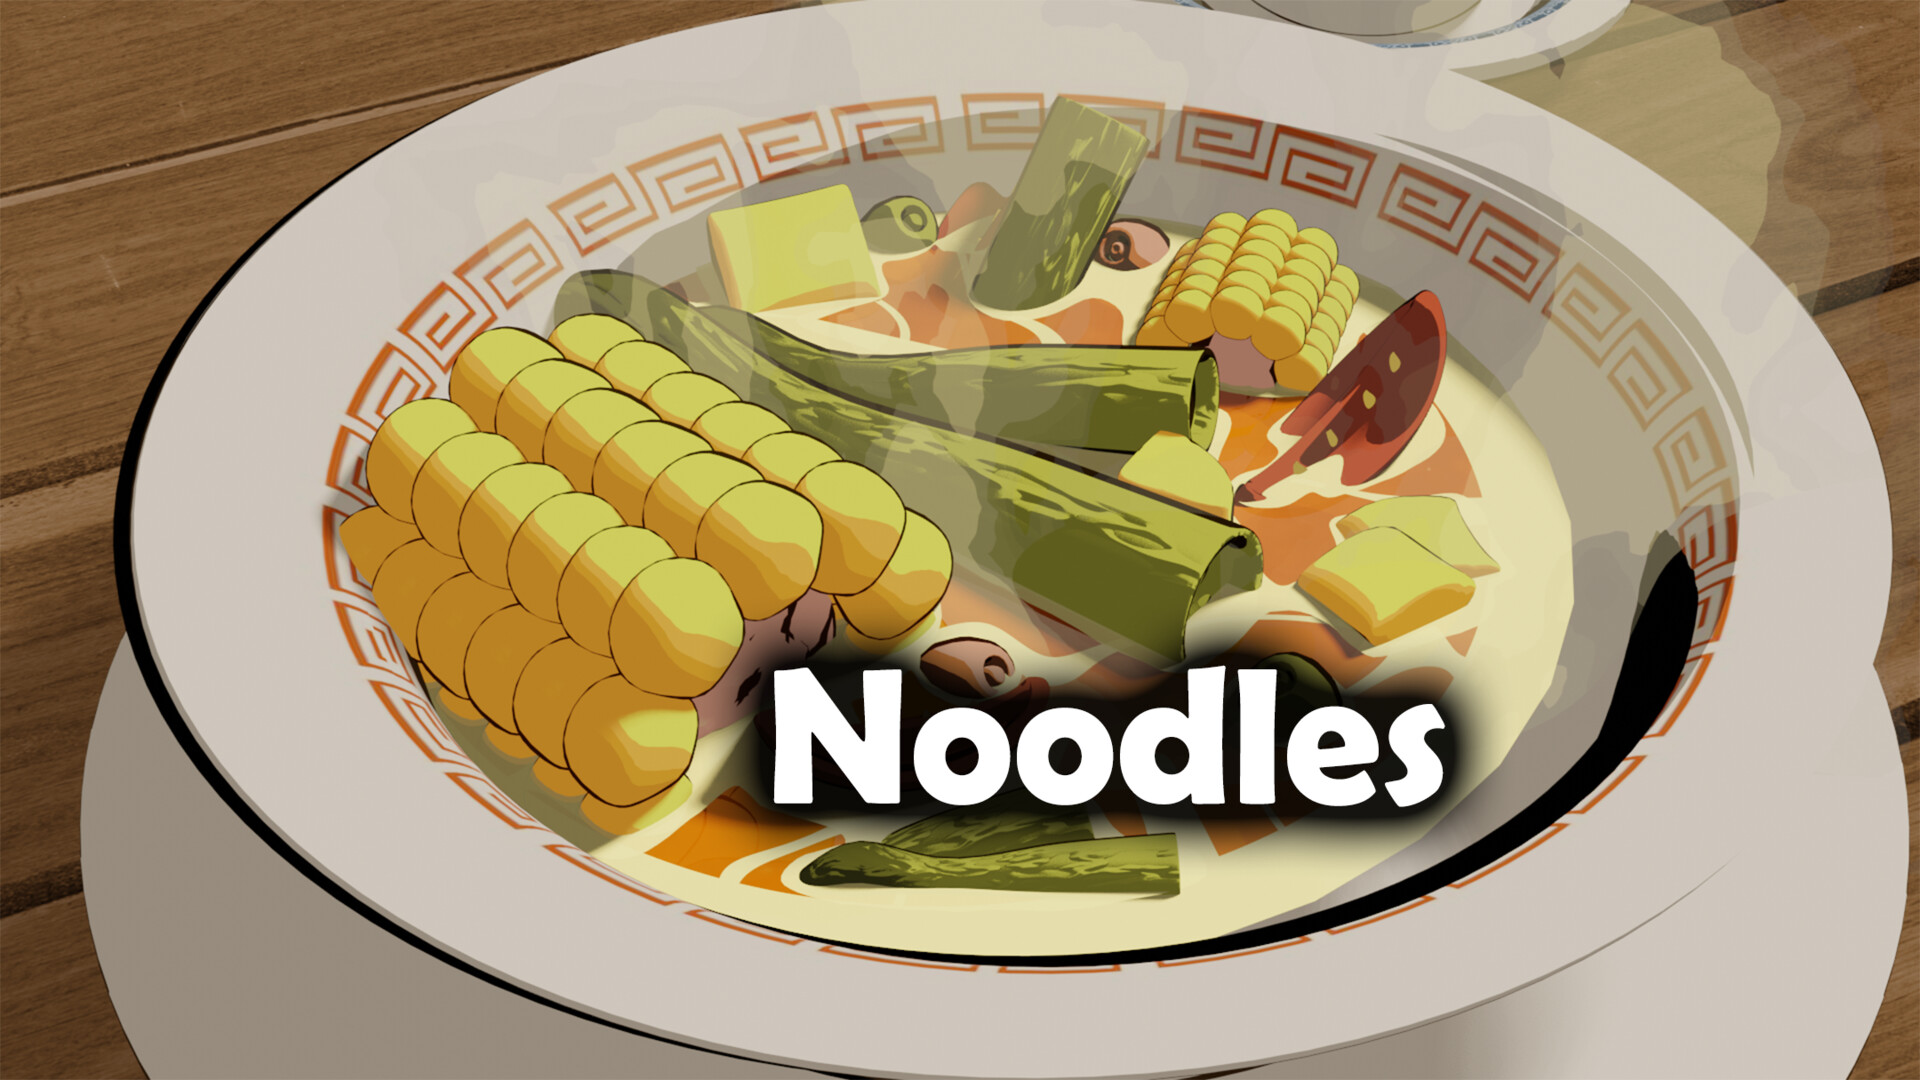 10 wonderful anime food ideas you should try to satisfy your inner foodie -  YEN.COM.GH